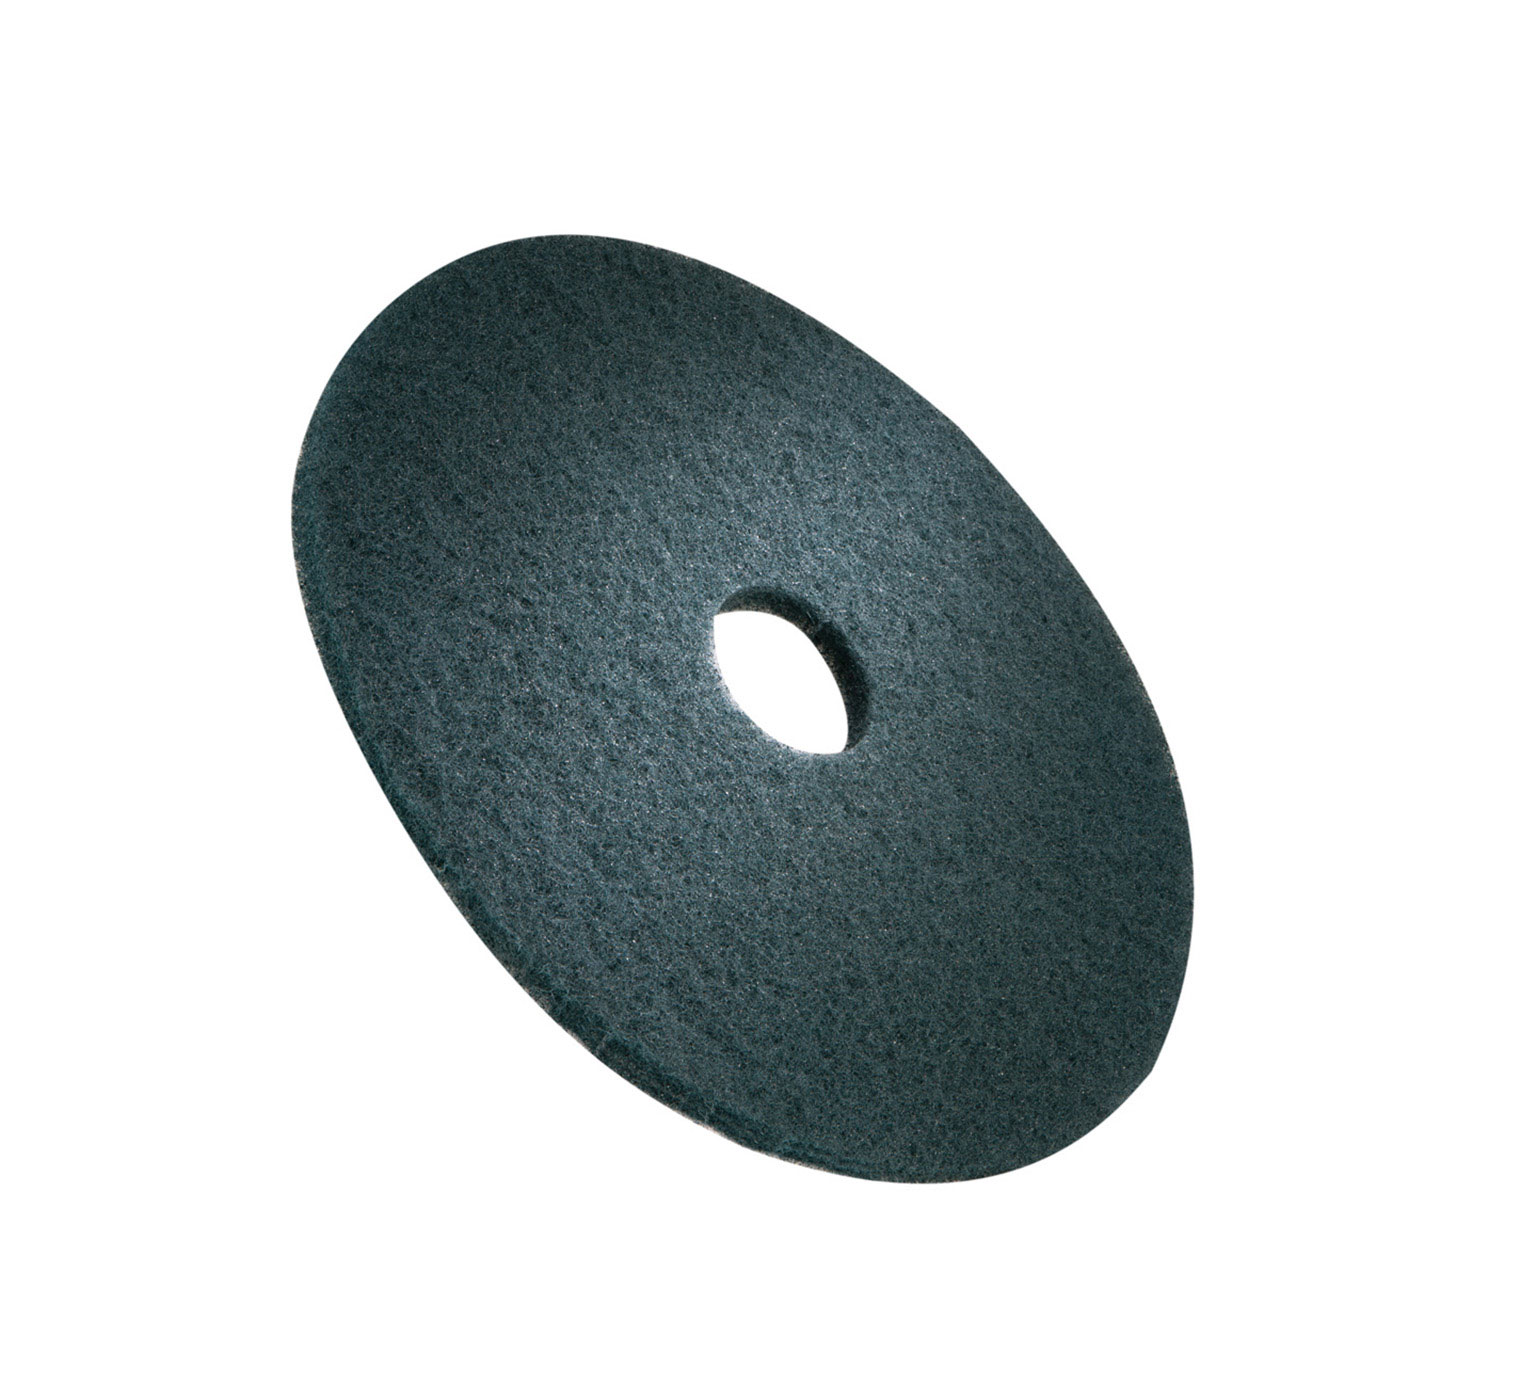 Details about   18 INCH BLUE FLOOR PADS FOR CLEANING AND SCRUBBING. 